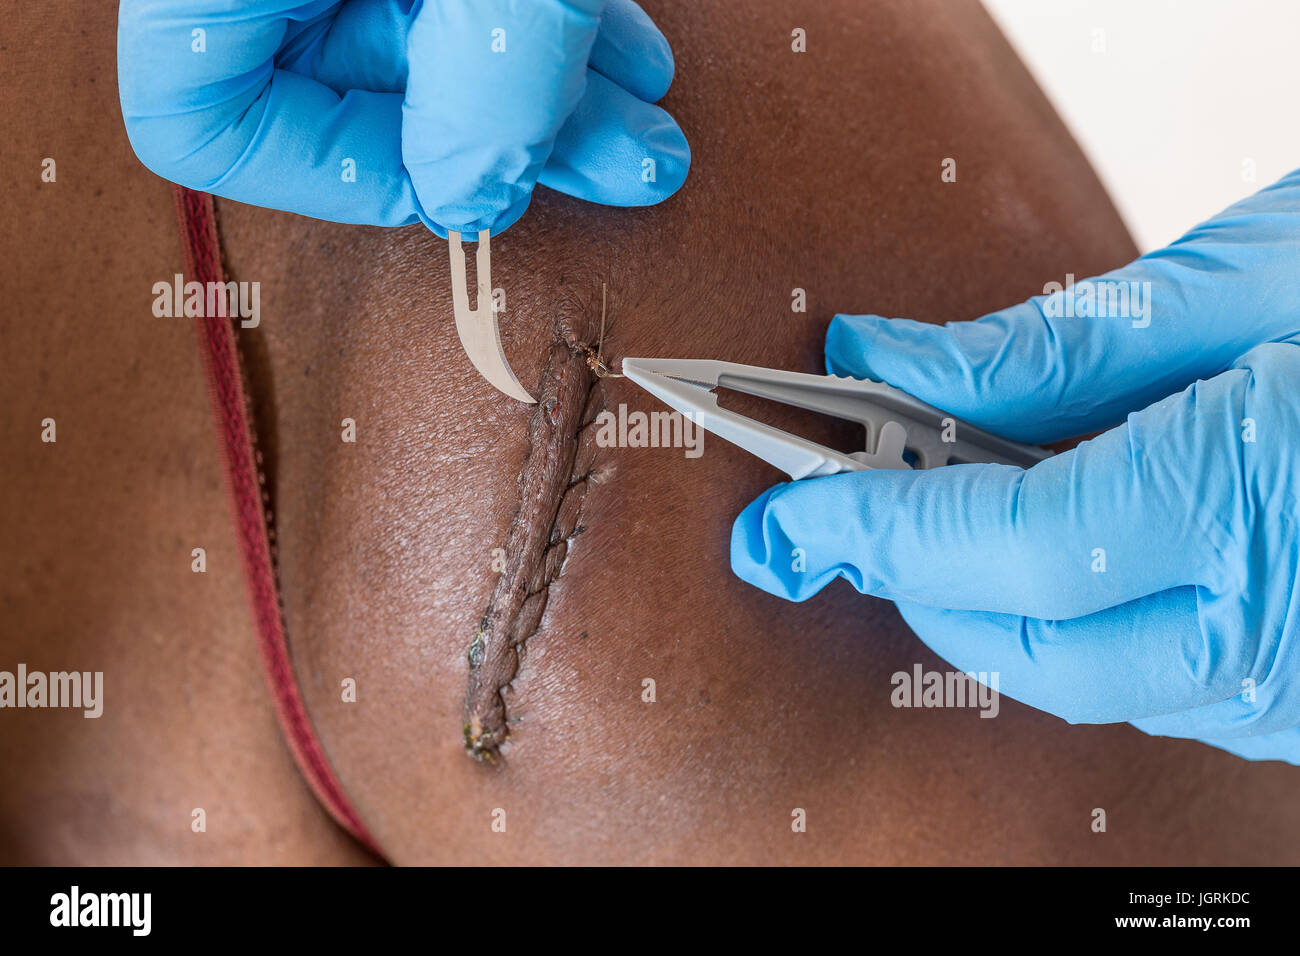 gloved hands Removing medical thread from wound with stitches on woam blaclk skin shoulder with medical equipment, Stock Photo